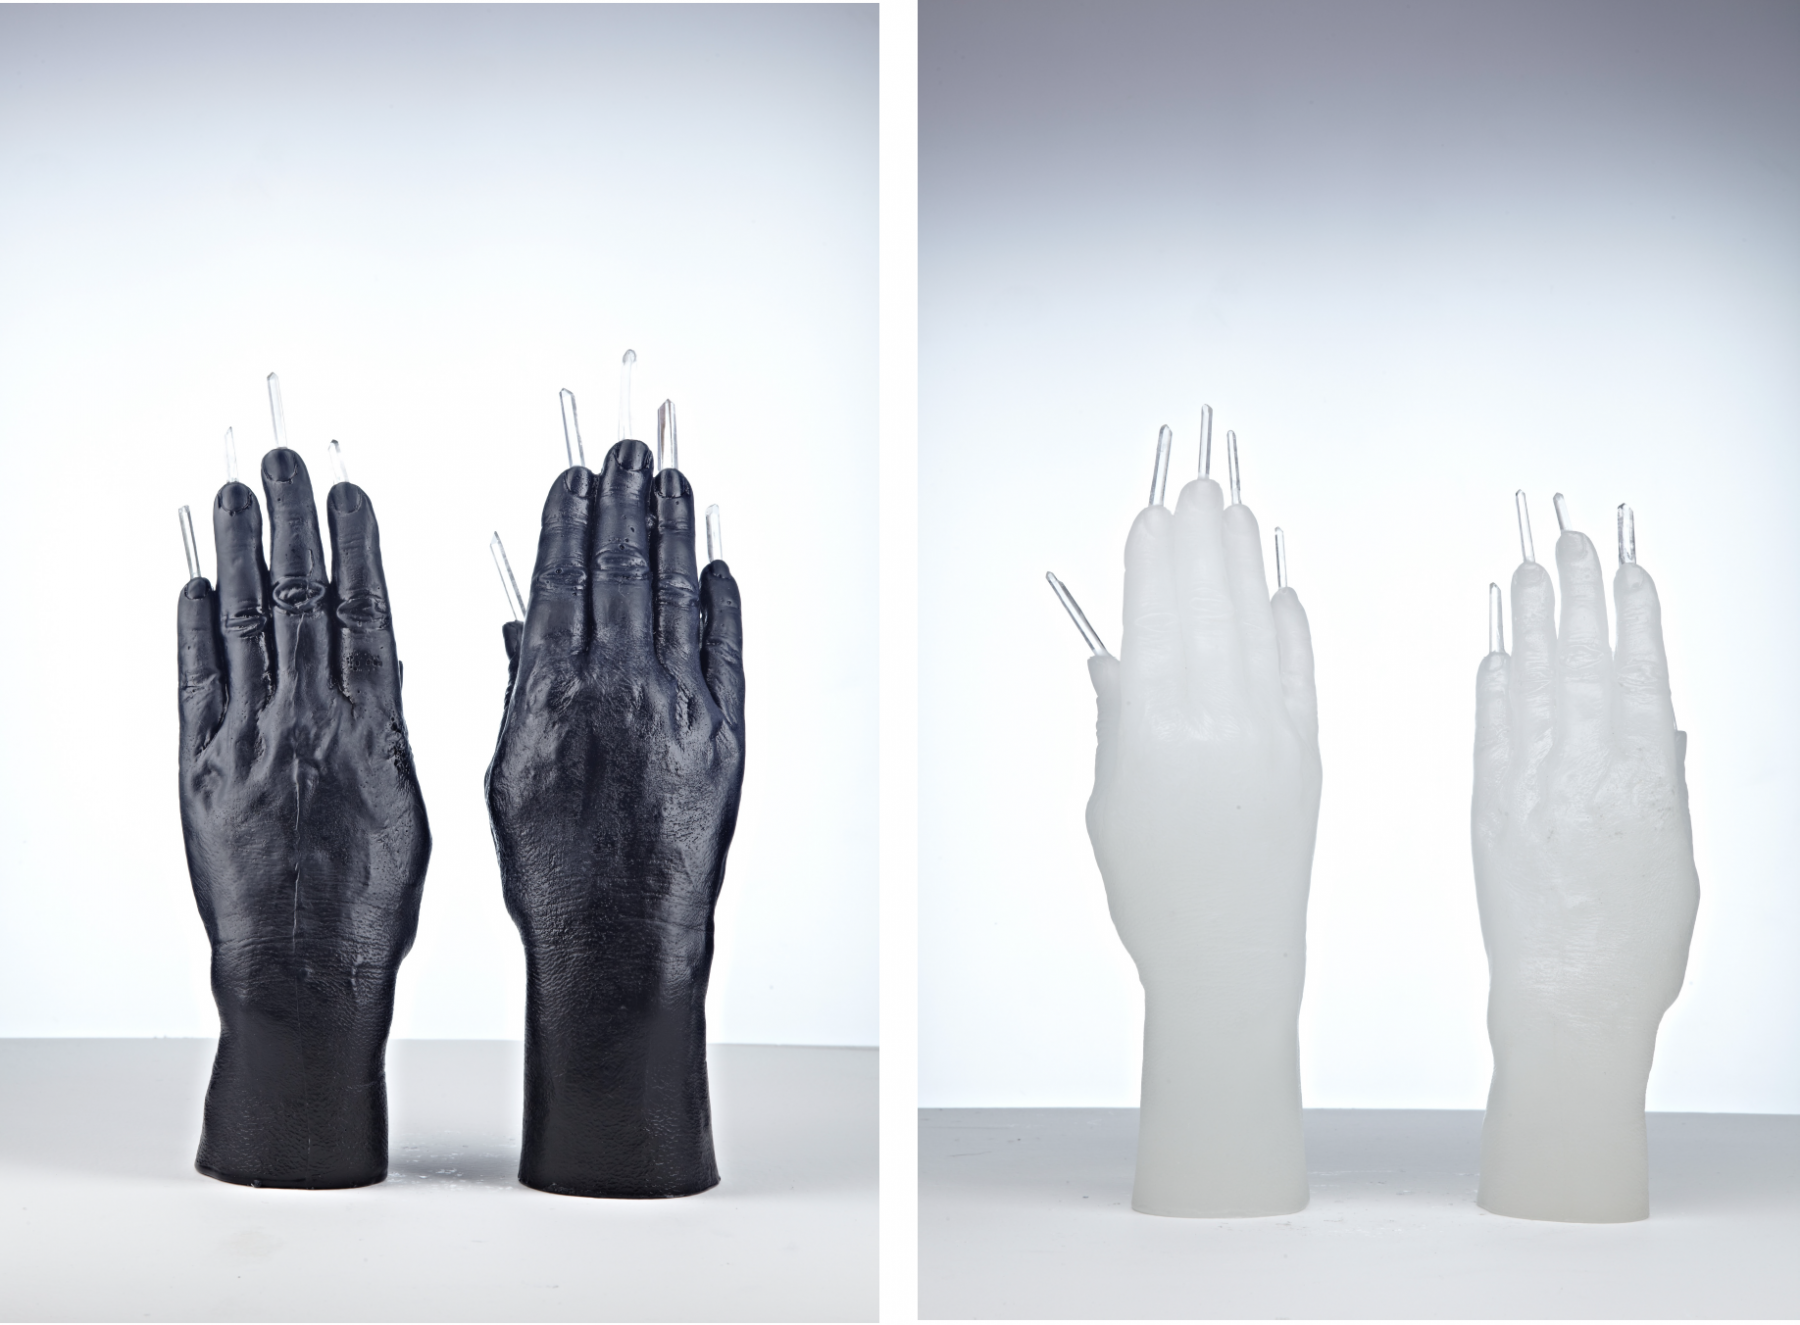 The Communicator (hands 2), 2012, hands made of black wax with crystal quartz stones, 9 7/8 x 4 x 1 1/2 inches, unique

The Communicator (hands 1), 2012, hands made of white wax with crystal quartz stones, 9 7/8 x 4 x 1 1/2 inches,&amp;nbsp;unique

&amp;nbsp;